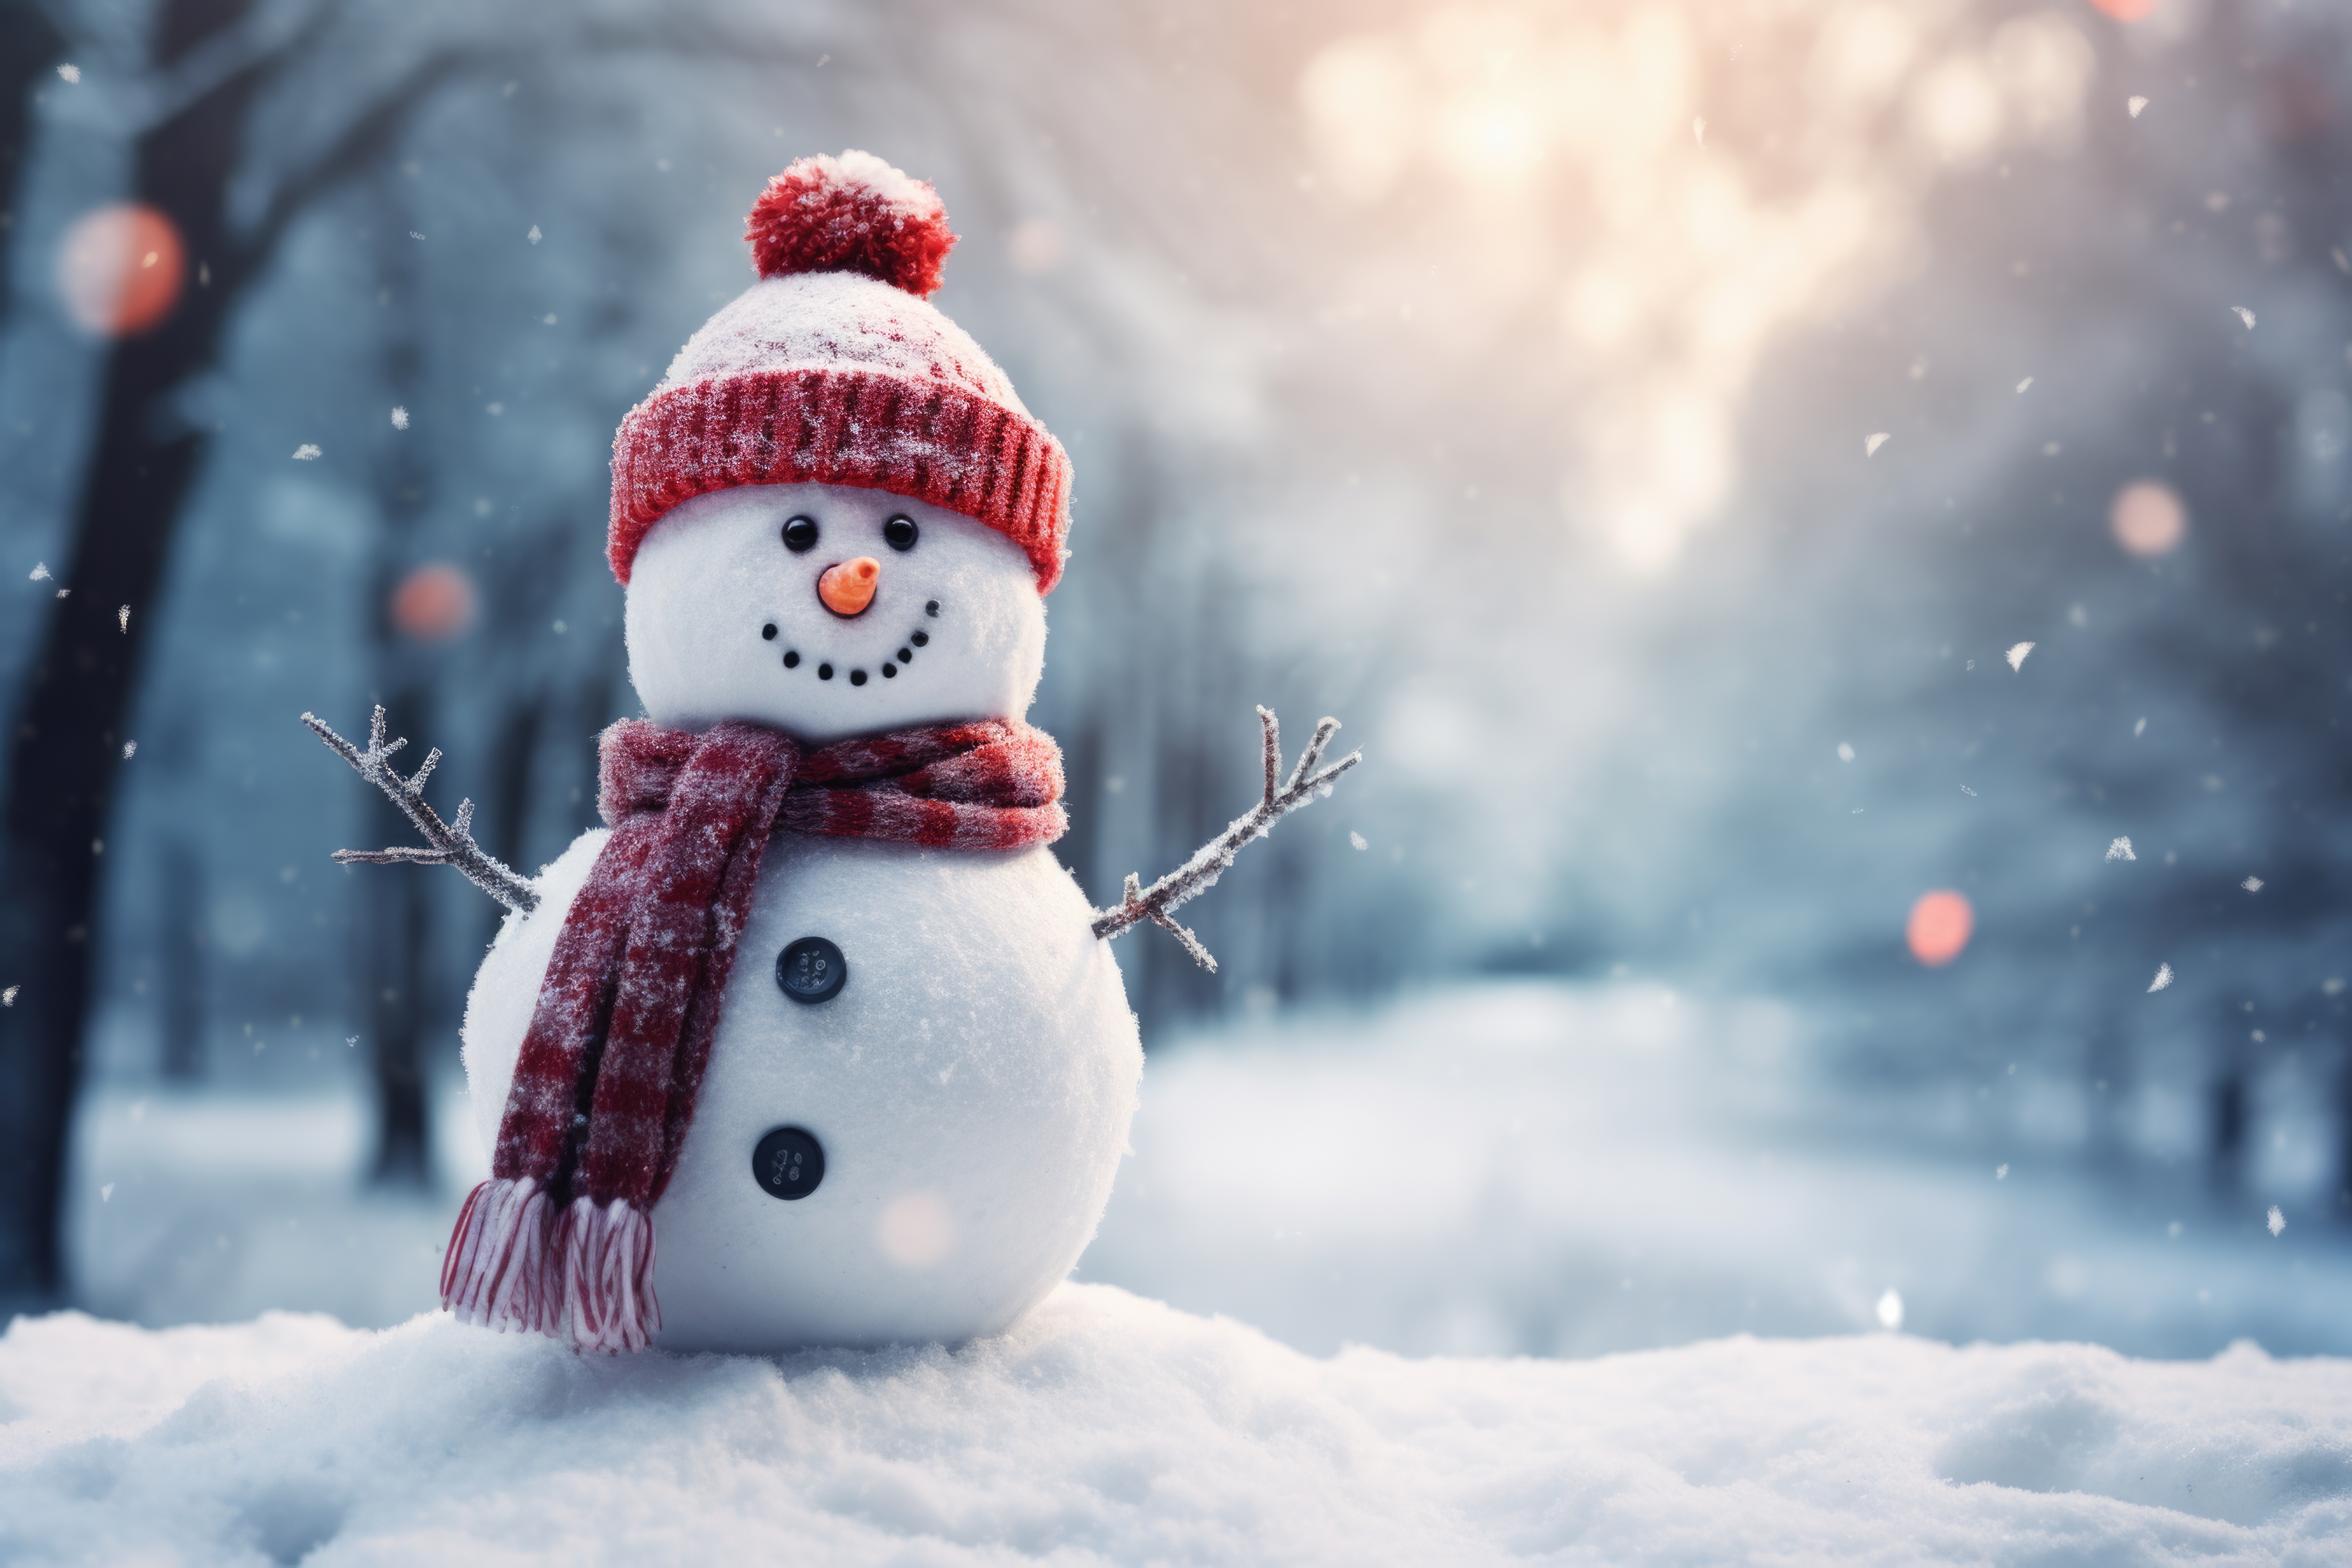 200+ Free Winter Stock Photos & Images, Page 2 of 10